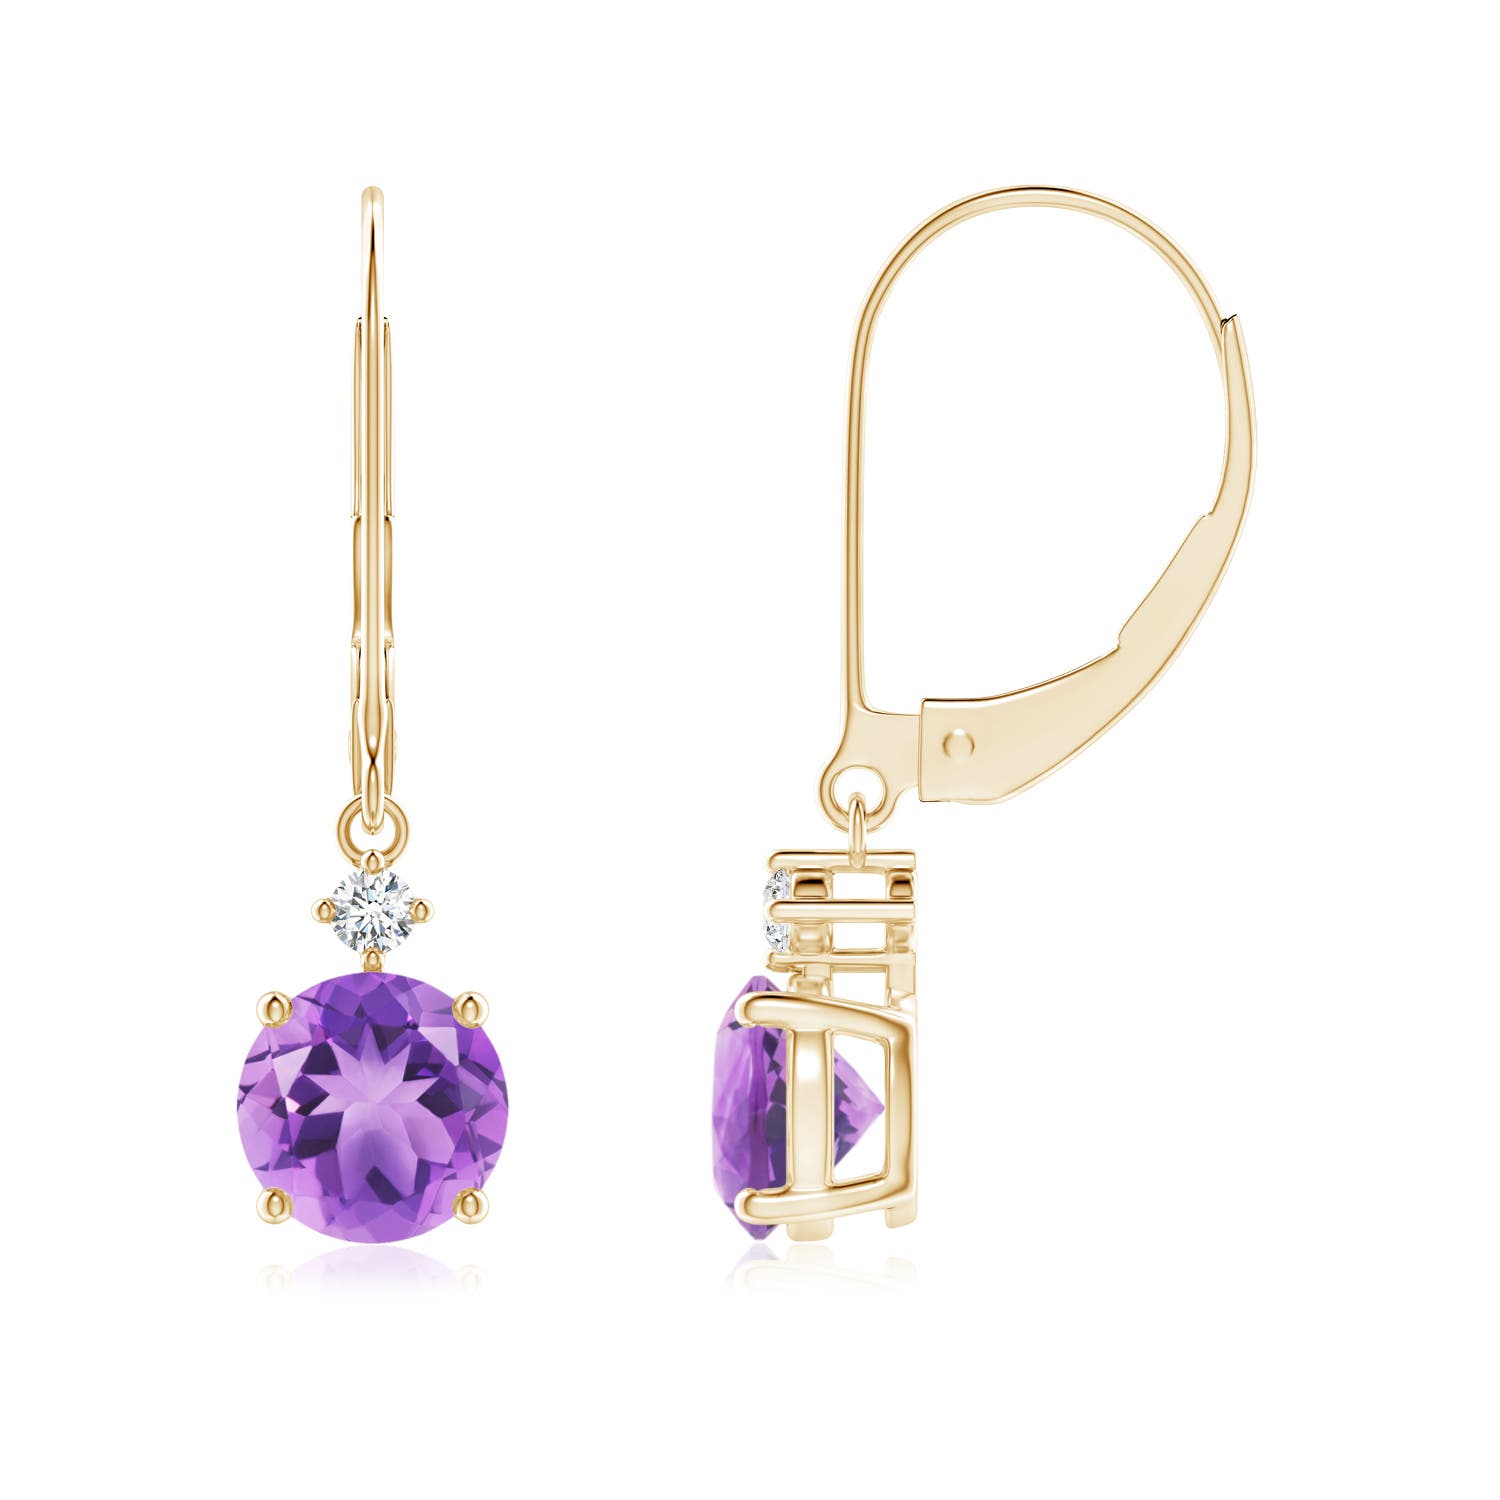 A - Amethyst / 1.65 CT / 14 KT Yellow Gold